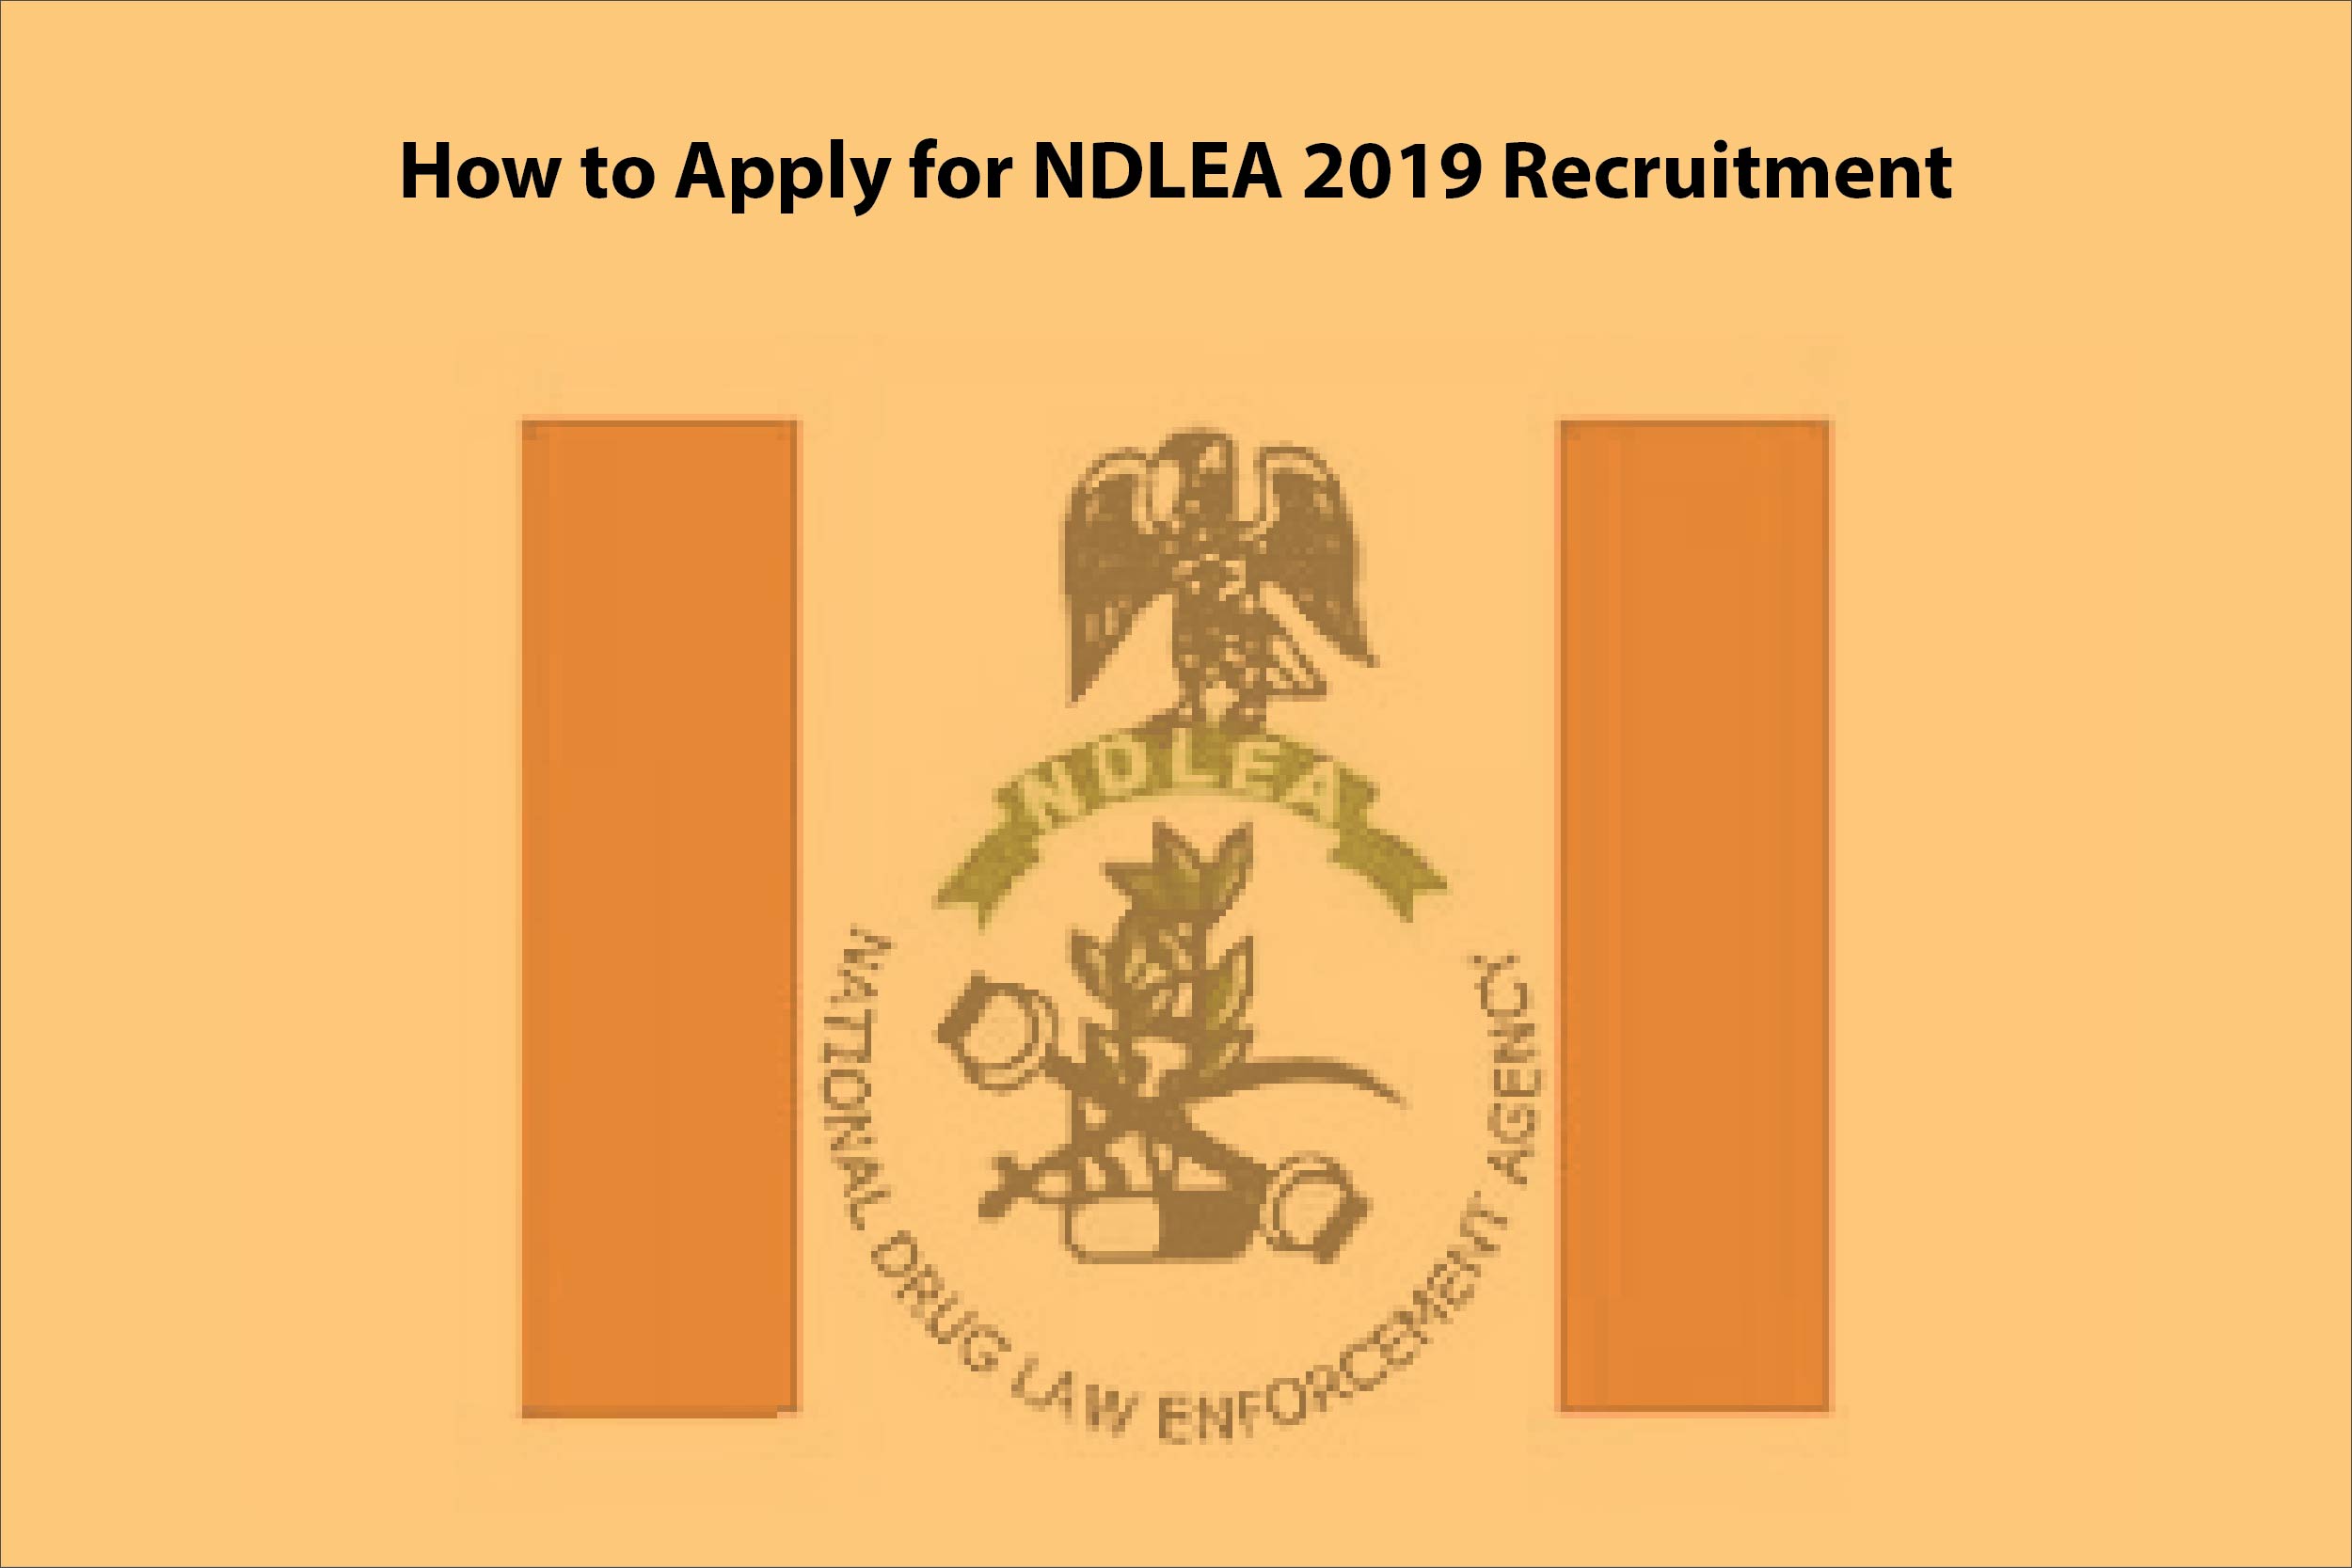 How to Apply for NDLEA 2019 Recruitment